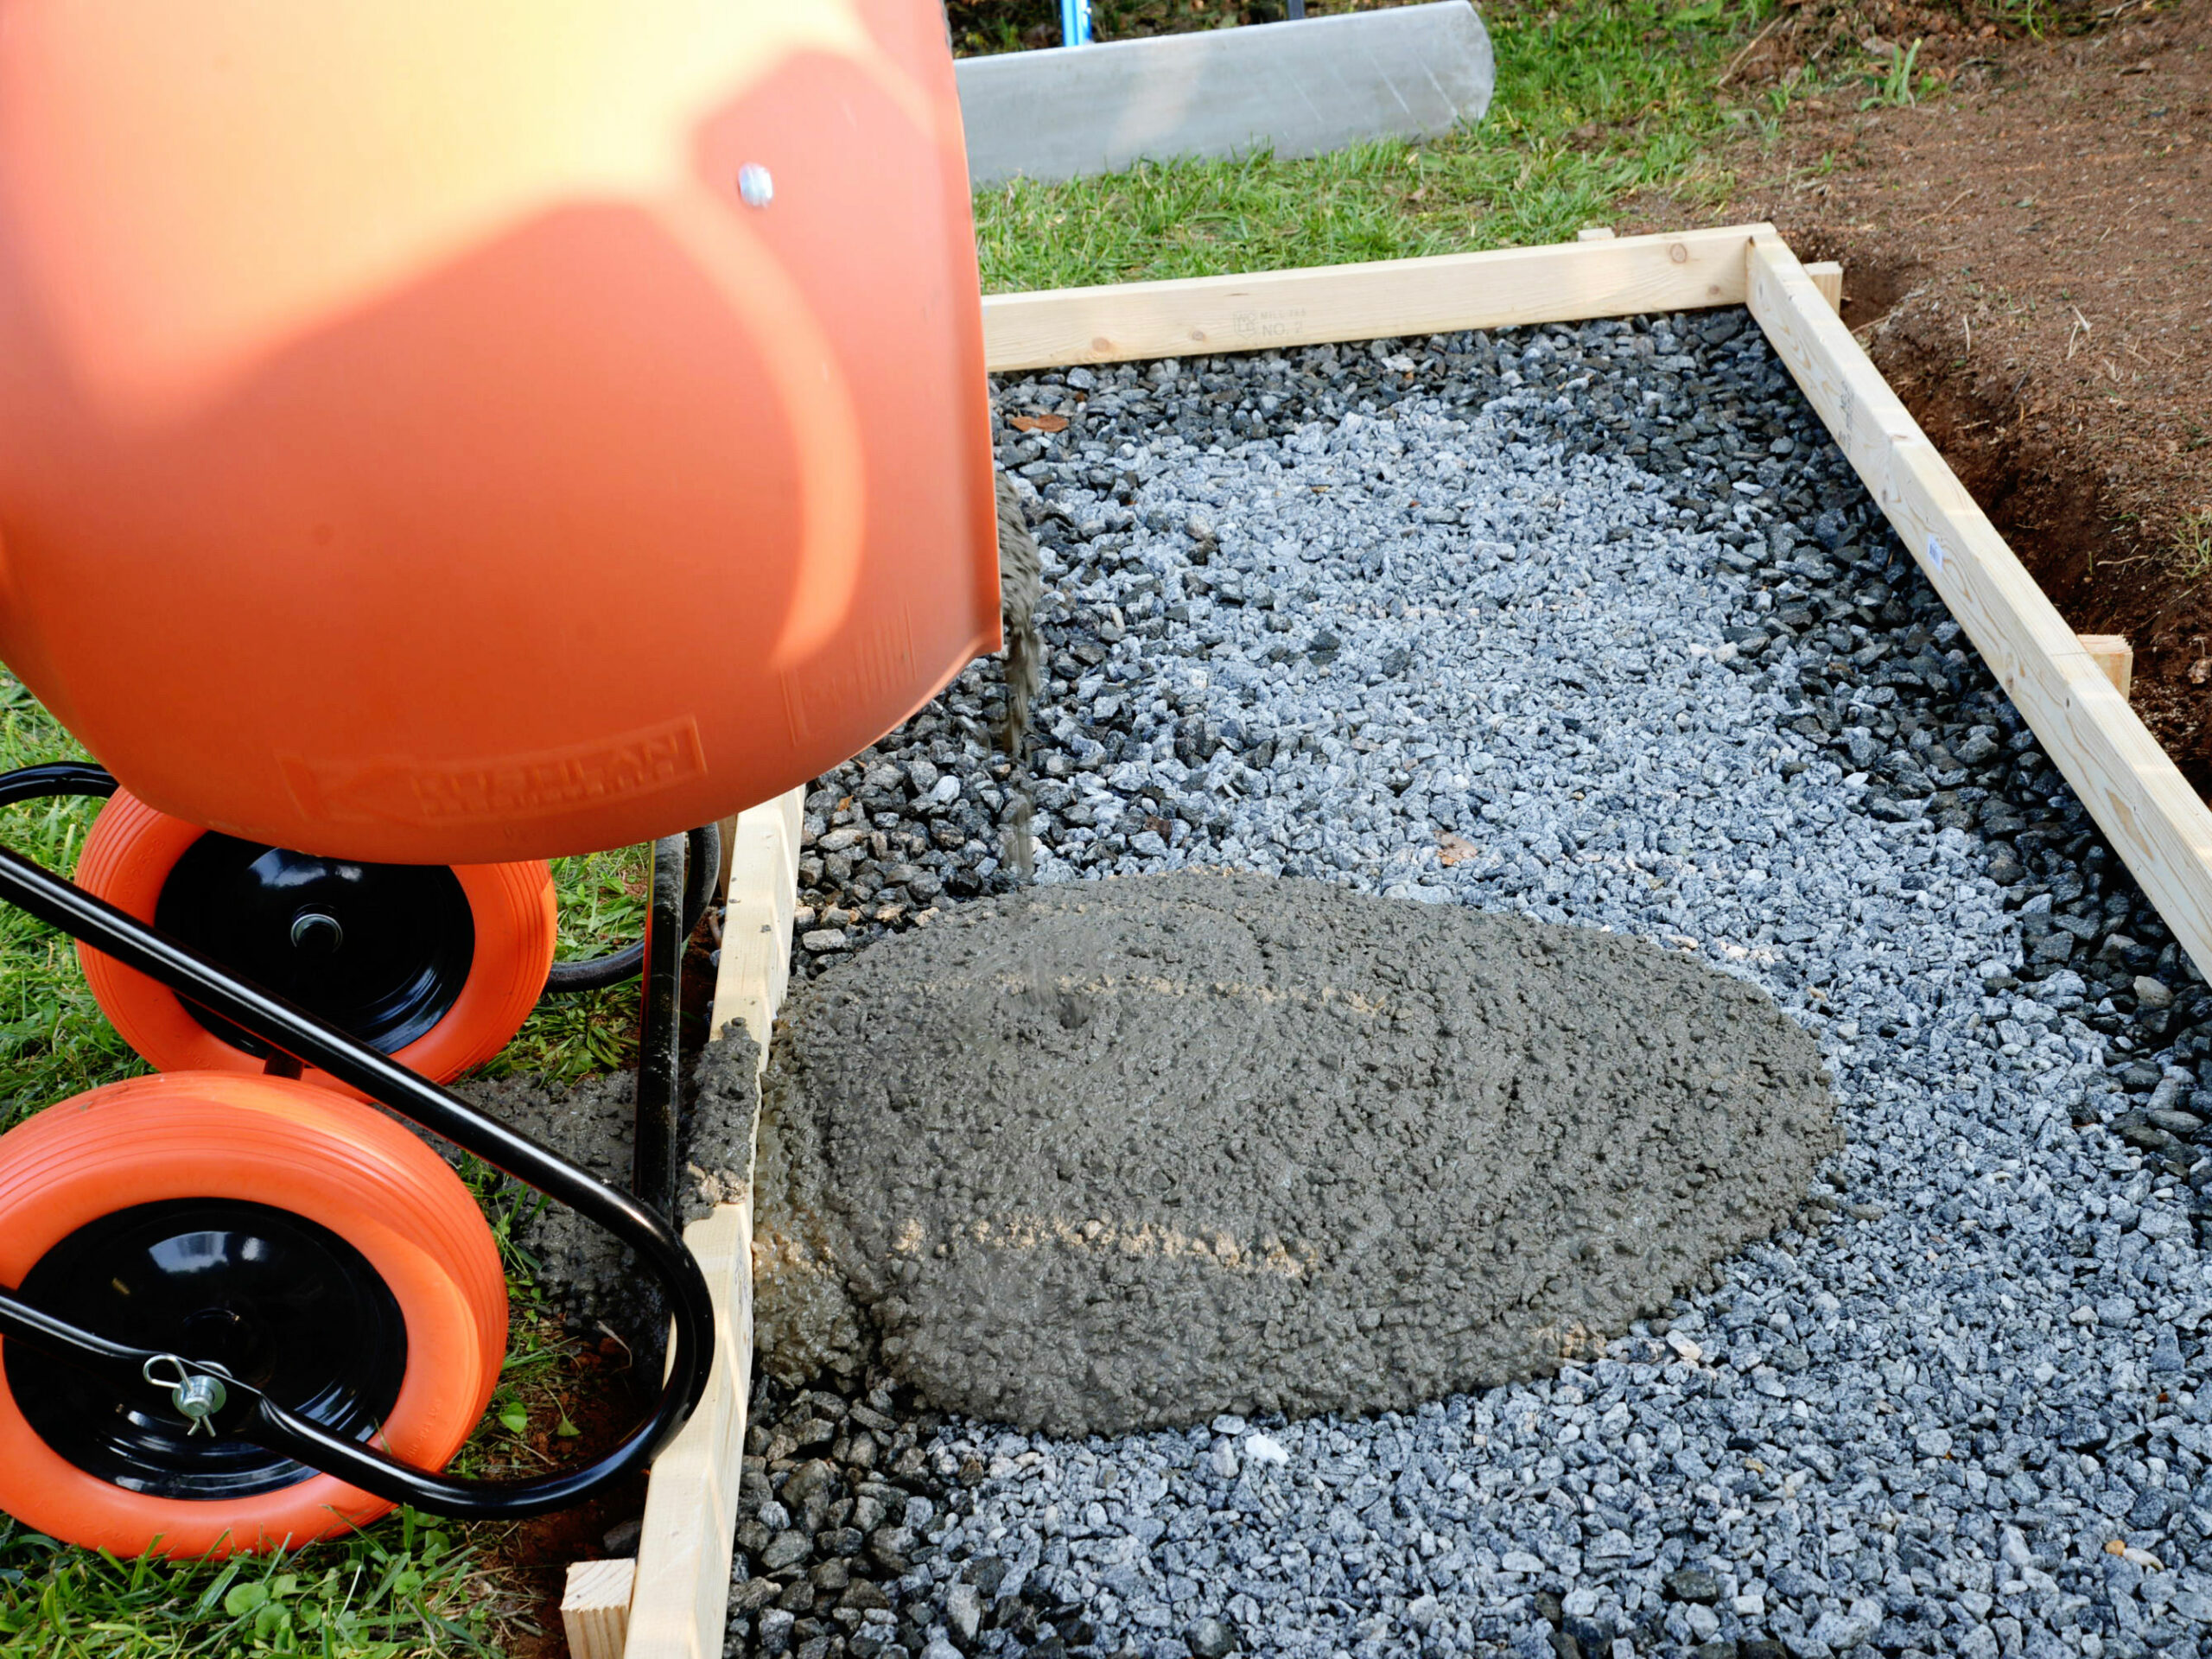 The Kushlan concrete mixer in use pouring a cement foundation in a yard